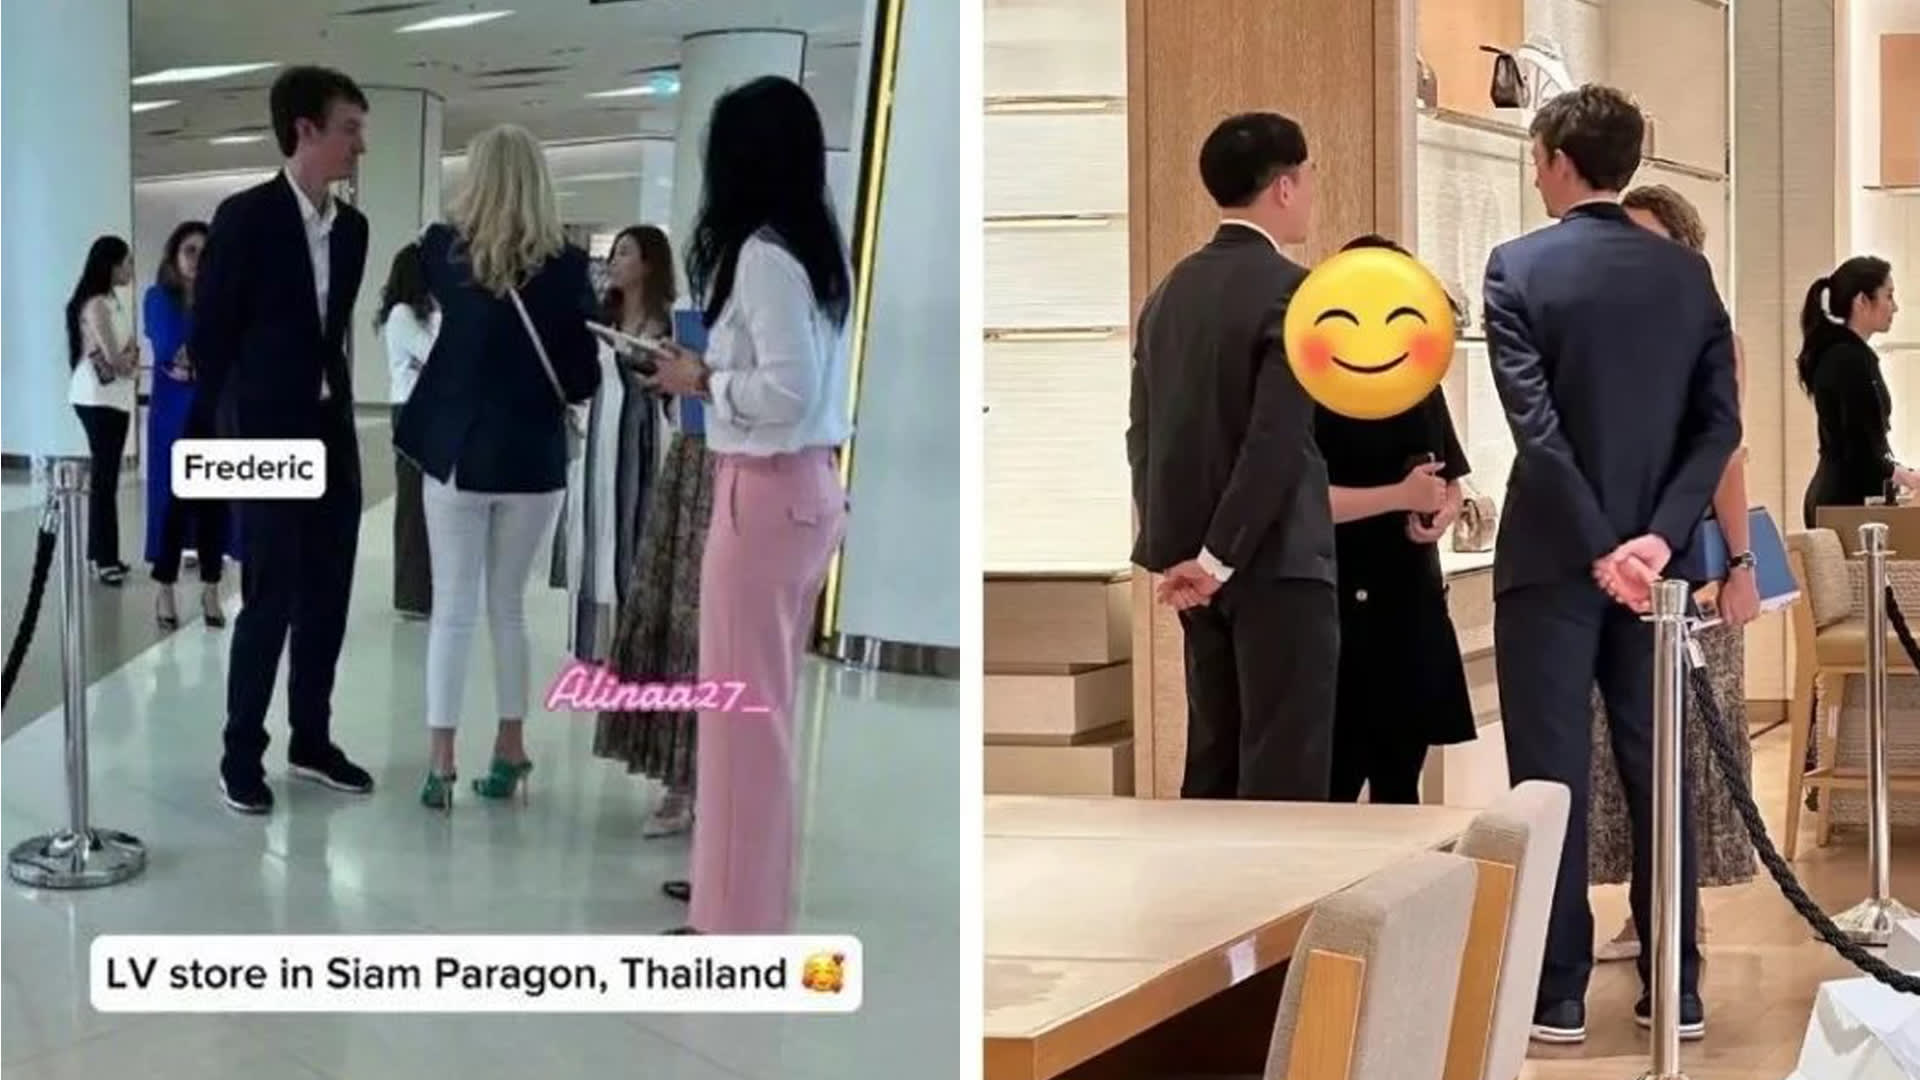 Is BLACKPINK member Lisa dating TAG Heuer CEO, Frederic Arnault? Here is  what we know - India Today